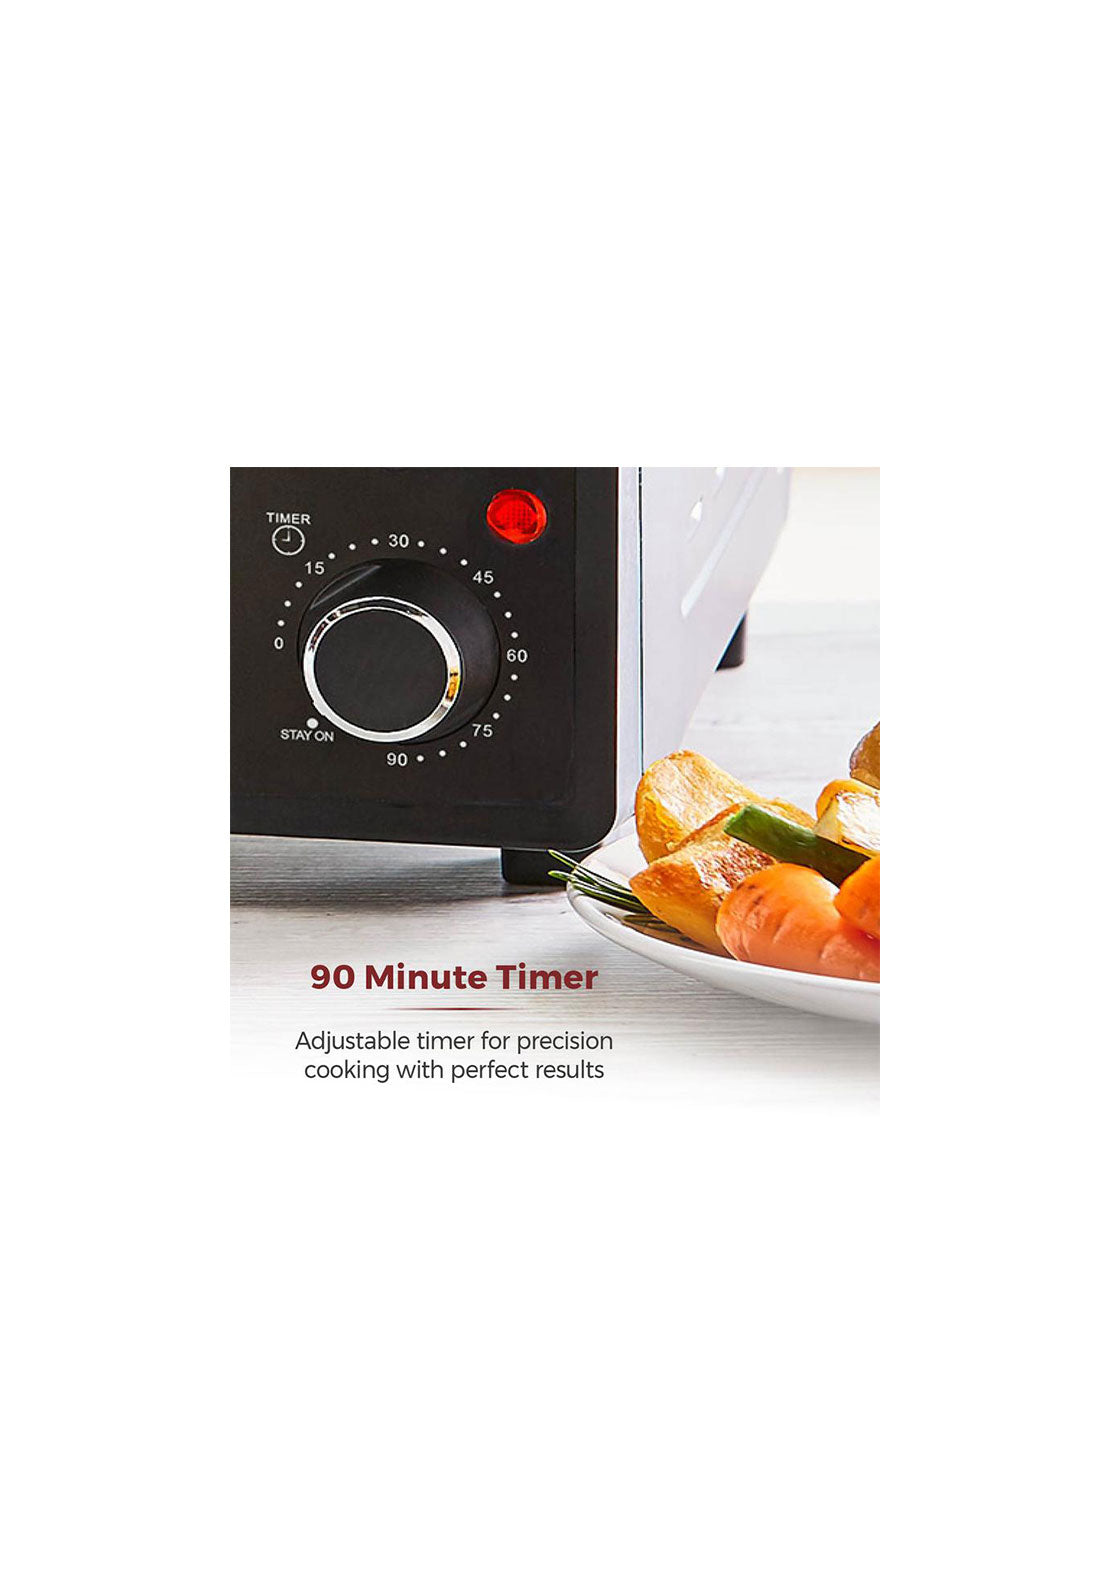 Tower 42L Mini Oven With Hot Plates | T14045 6 Shaws Department Stores